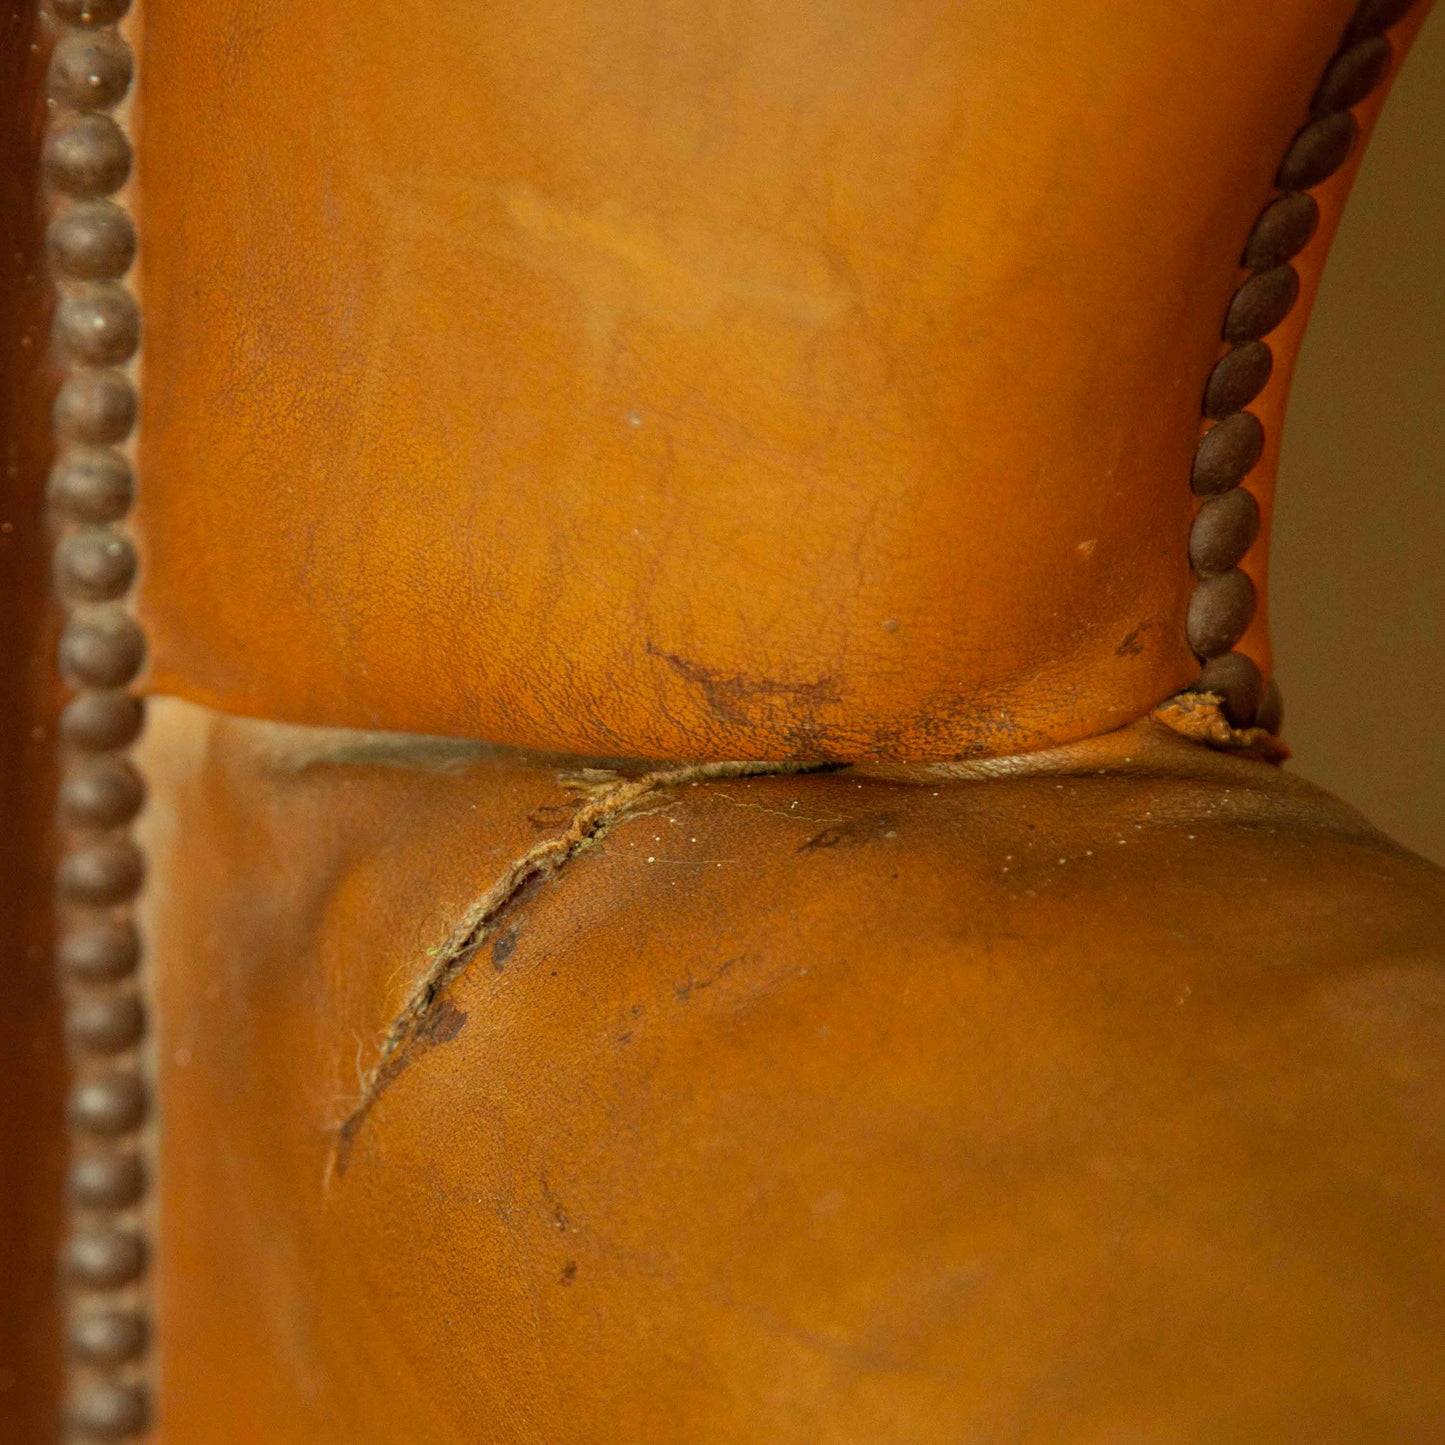 Leather Wingback Armchairs